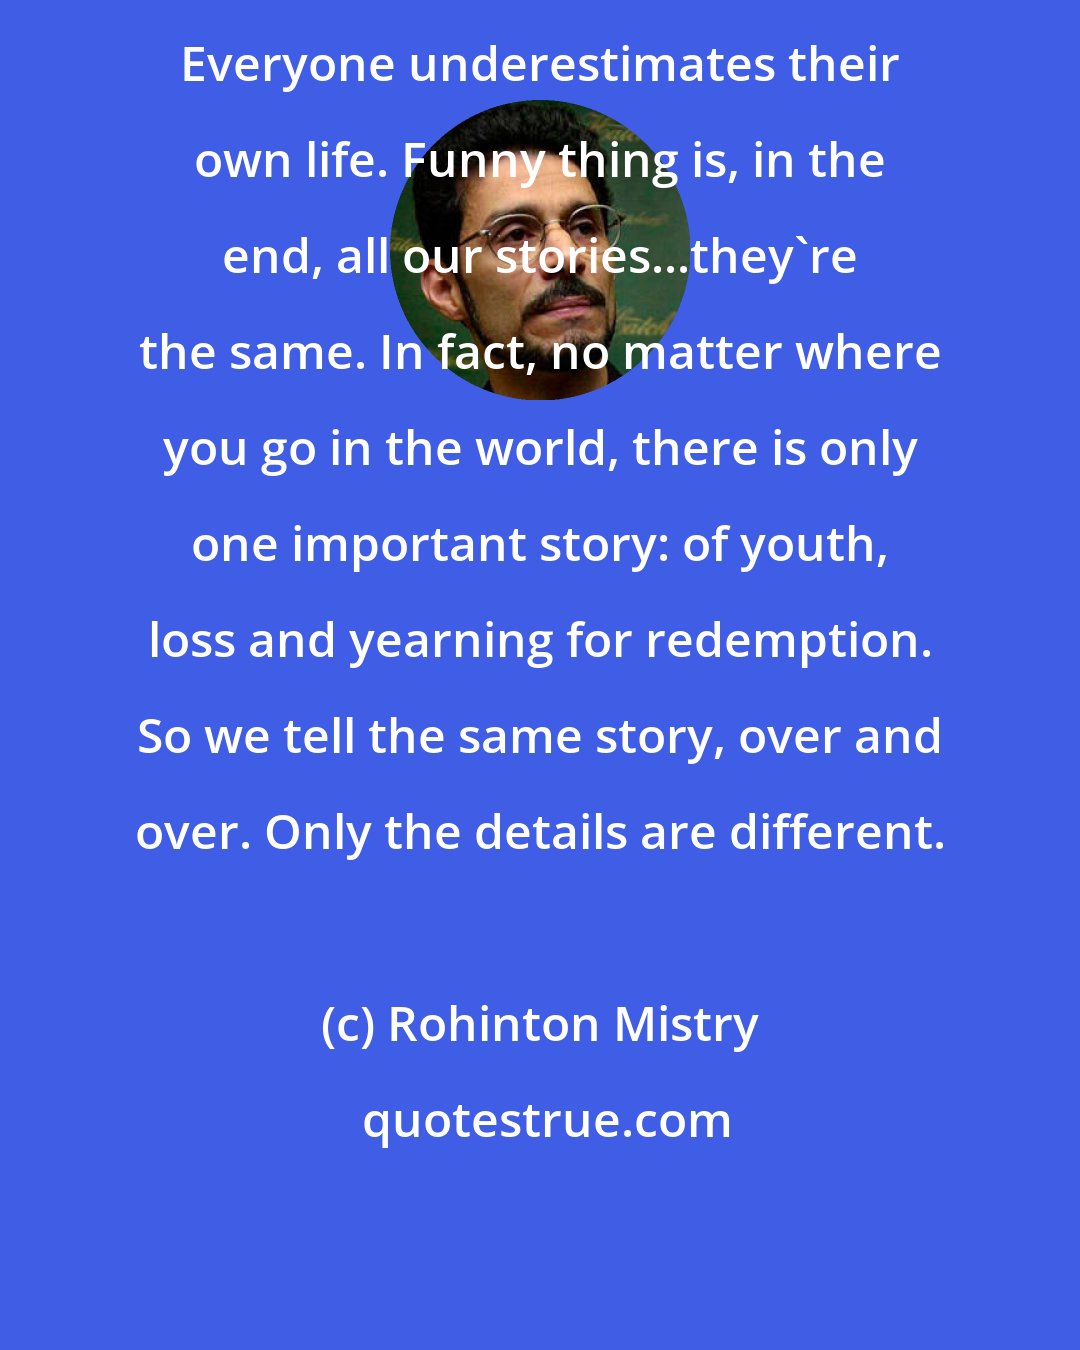 Rohinton Mistry: Everyone underestimates their own life. Funny thing is, in the end, all our stories...they're the same. In fact, no matter where you go in the world, there is only one important story: of youth, loss and yearning for redemption. So we tell the same story, over and over. Only the details are different.